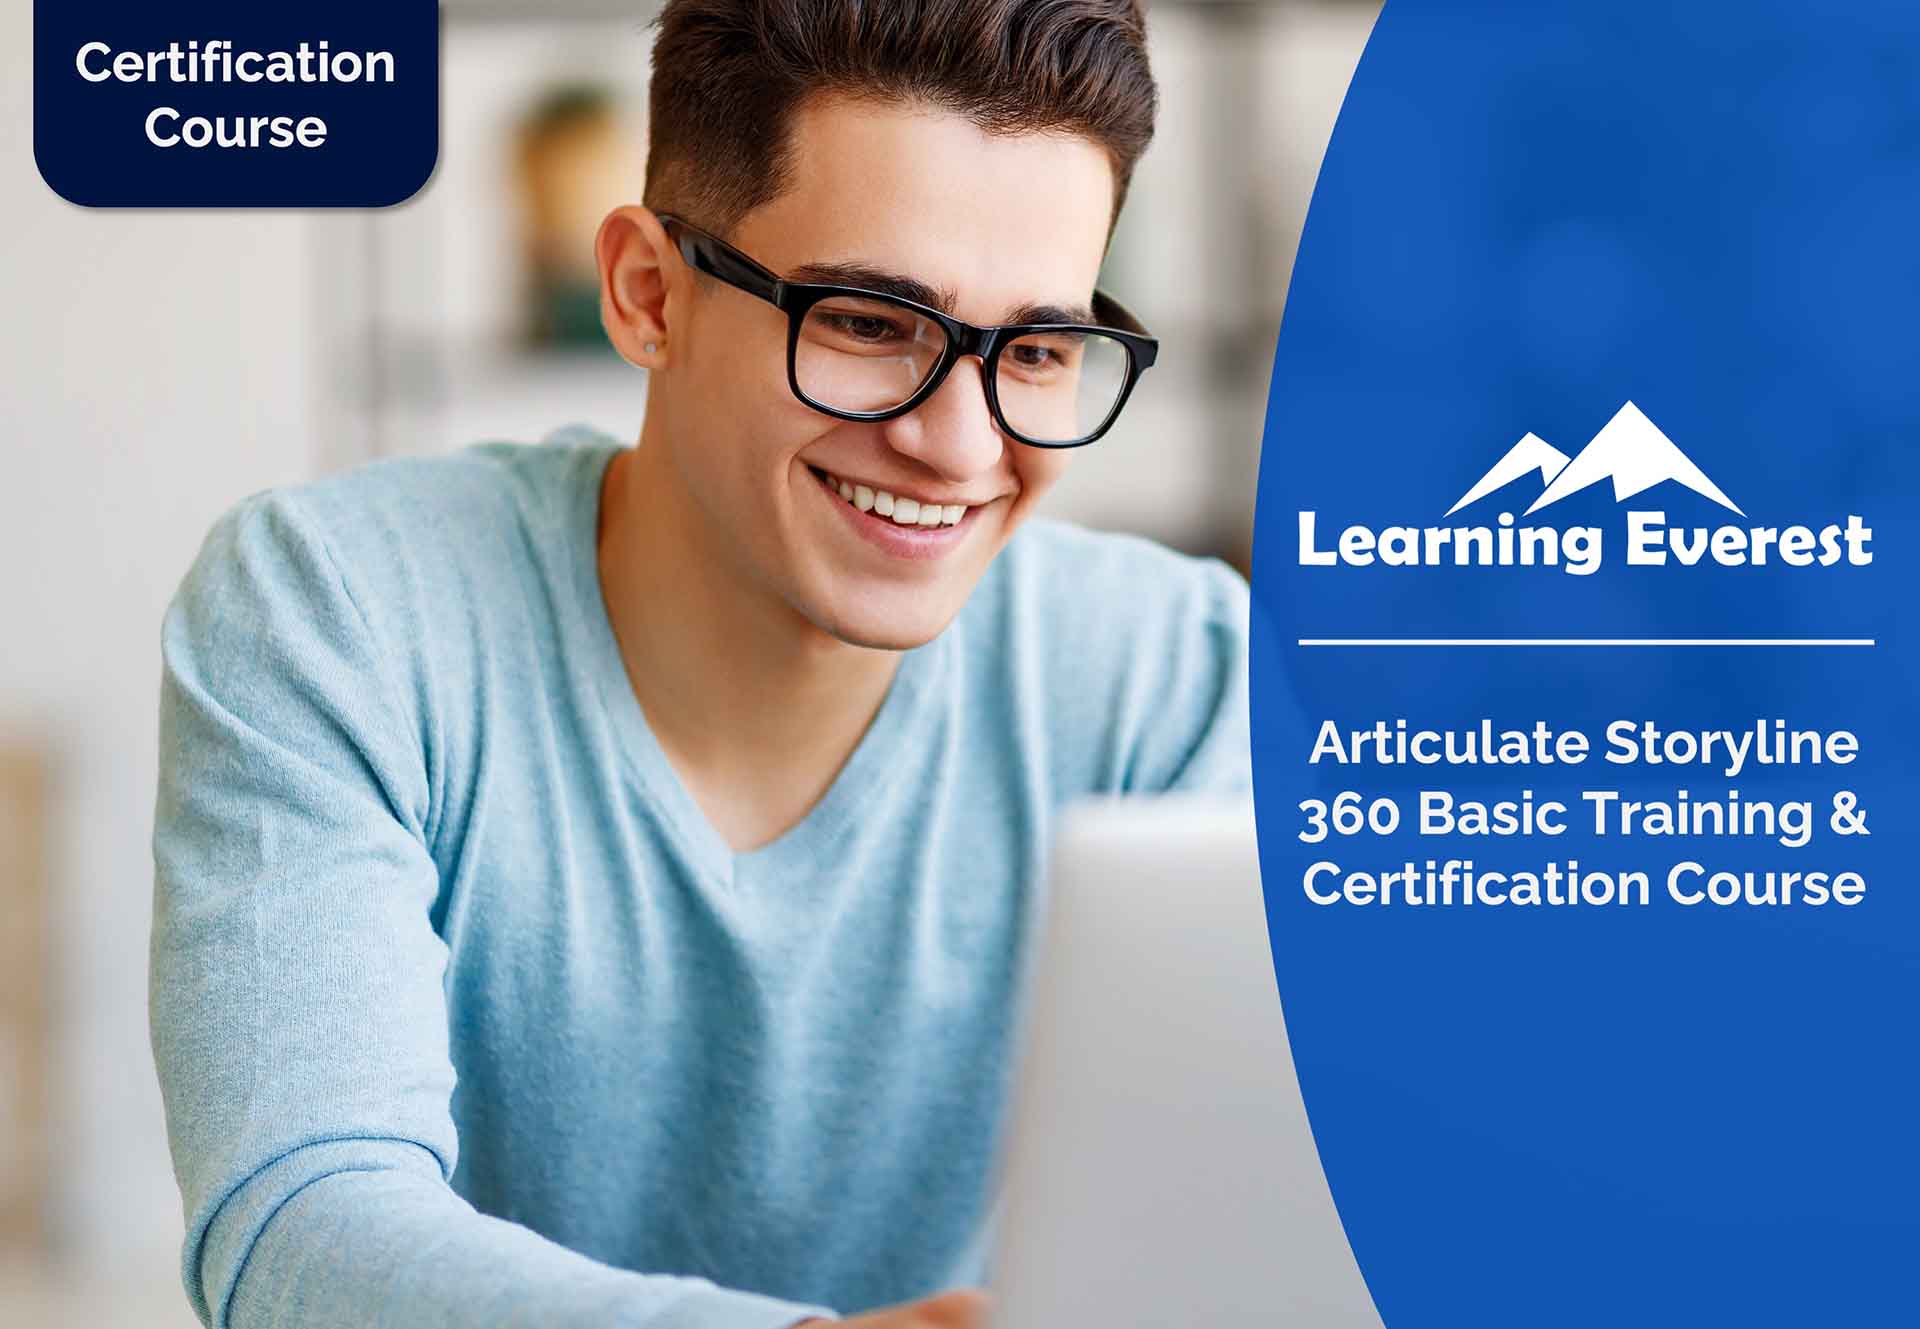 Articulate Storyline 360 Basic Training and Certification Course